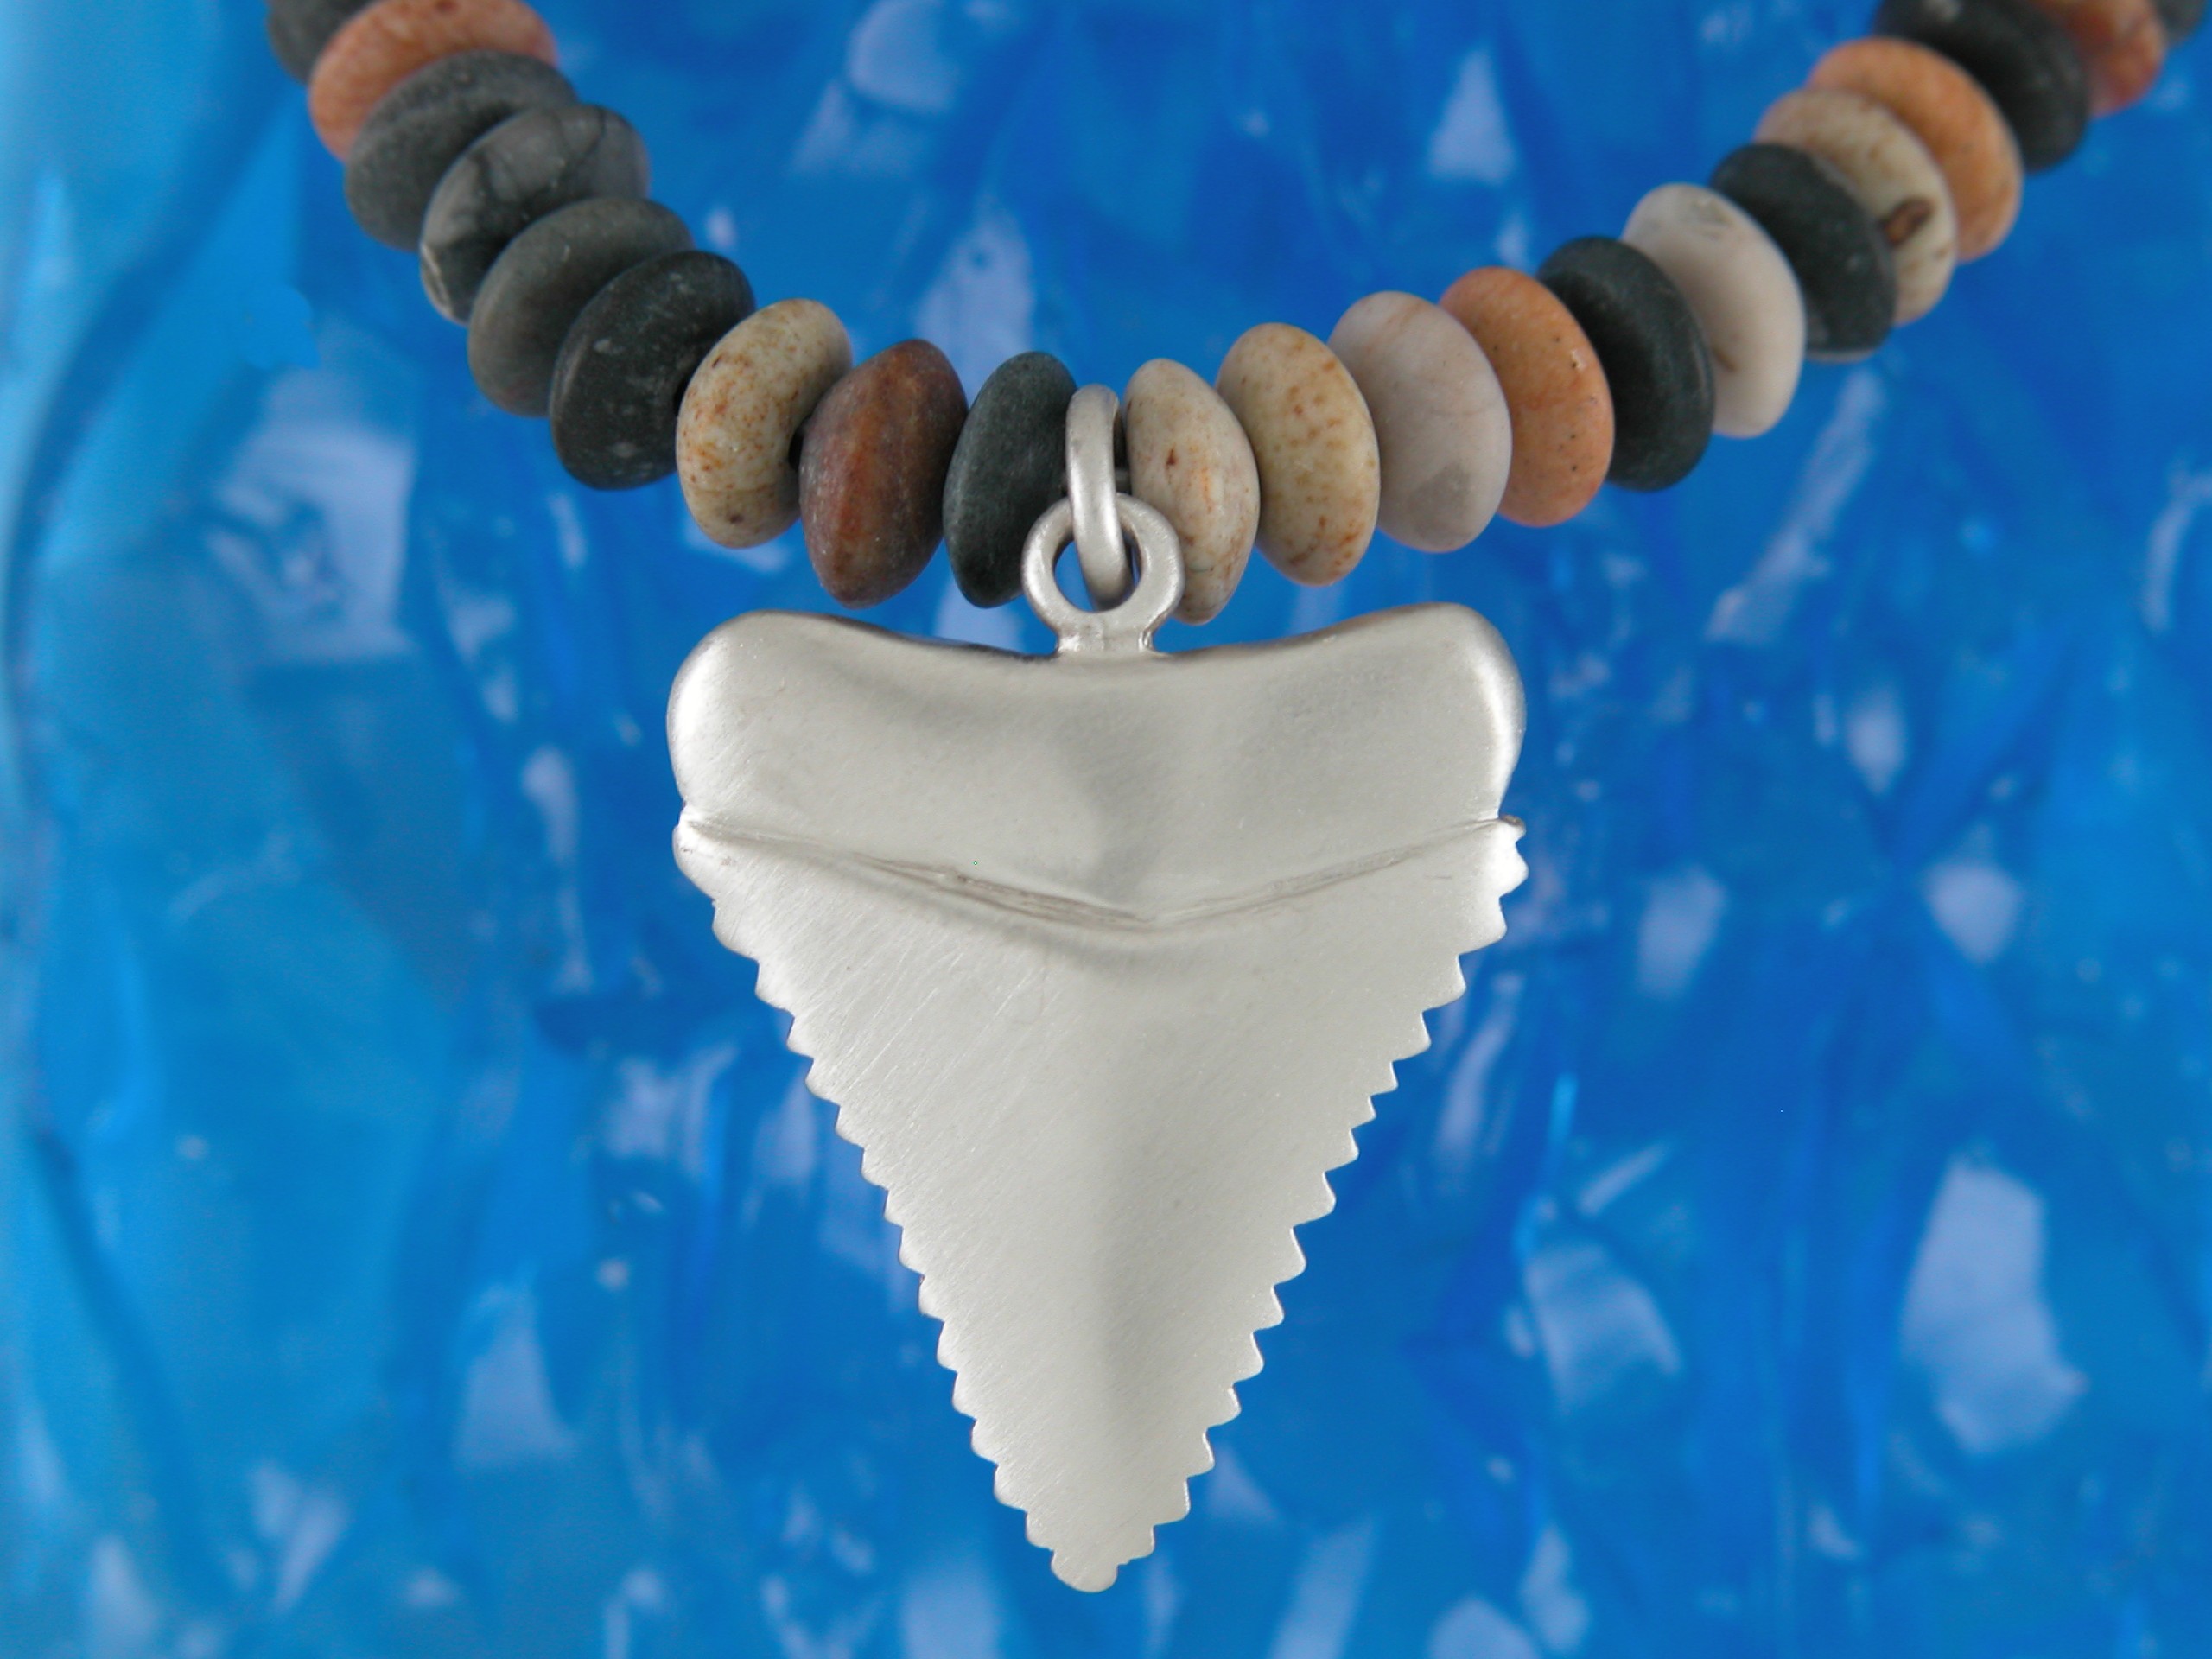 shark tooth necklace